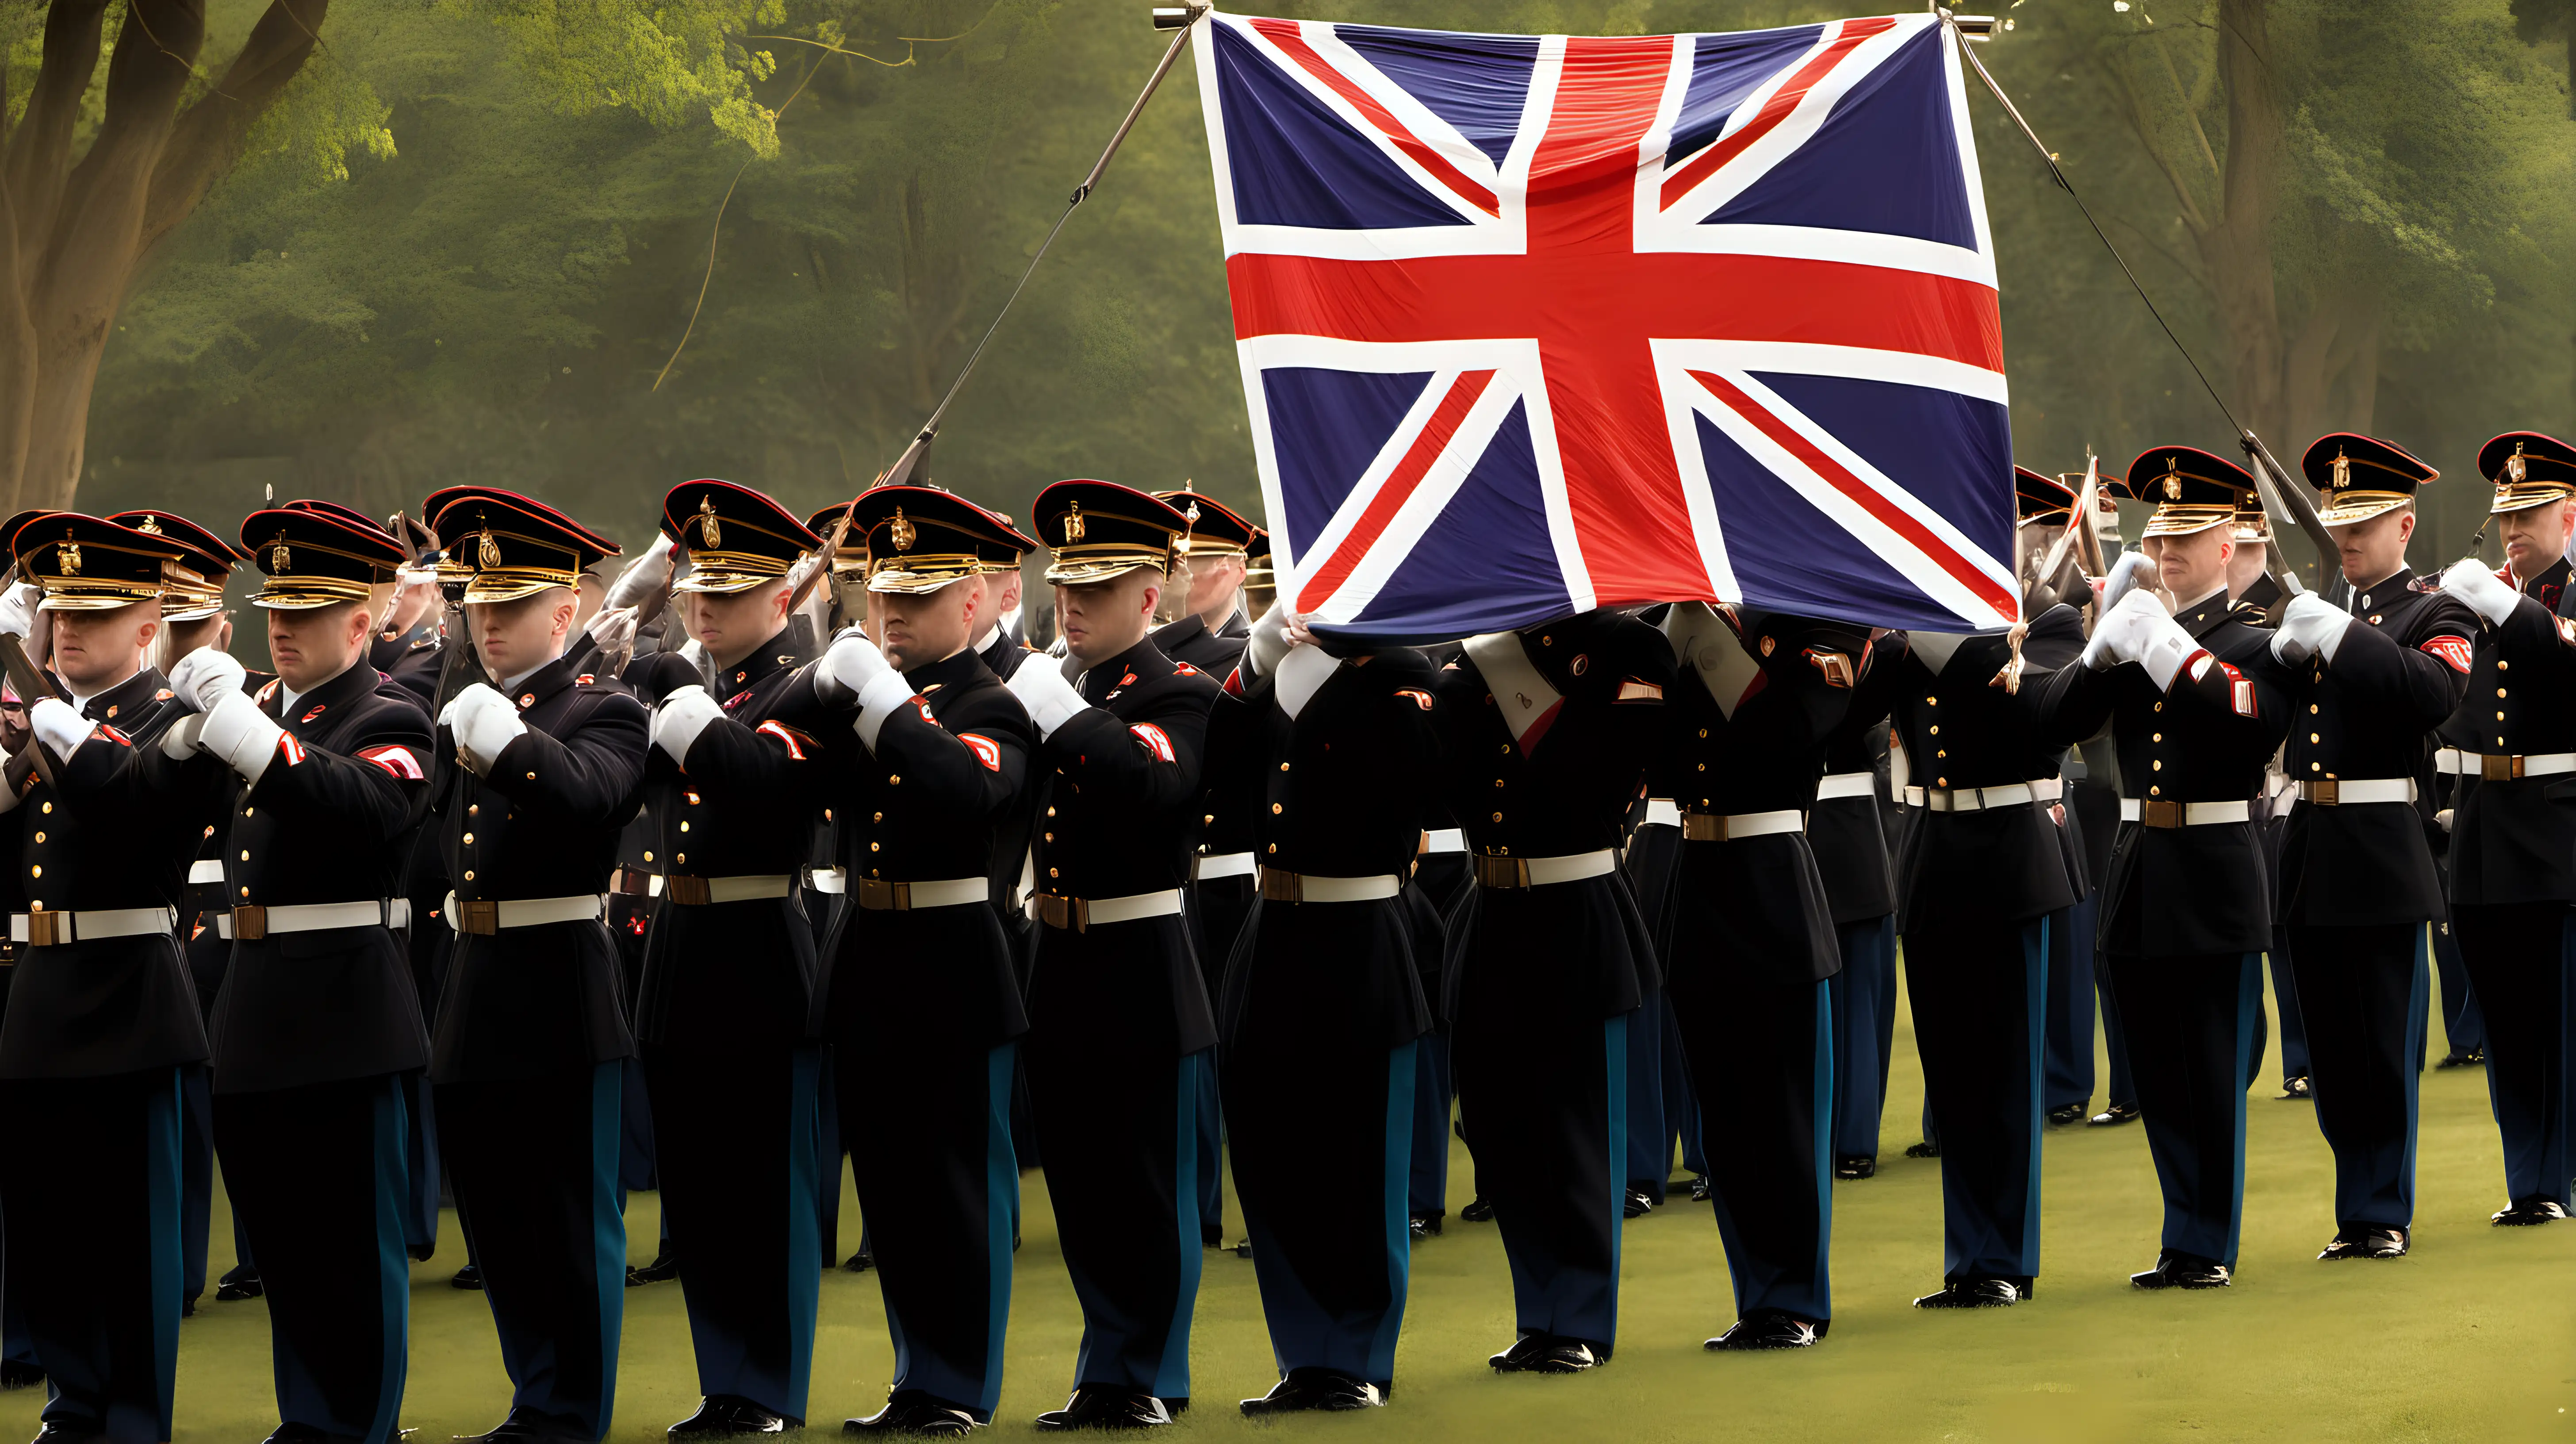 "Highlight the solemnity of a military ceremony where soldiers hoist the Union Jack in honor of their country, their commitment unwavering and resolute."